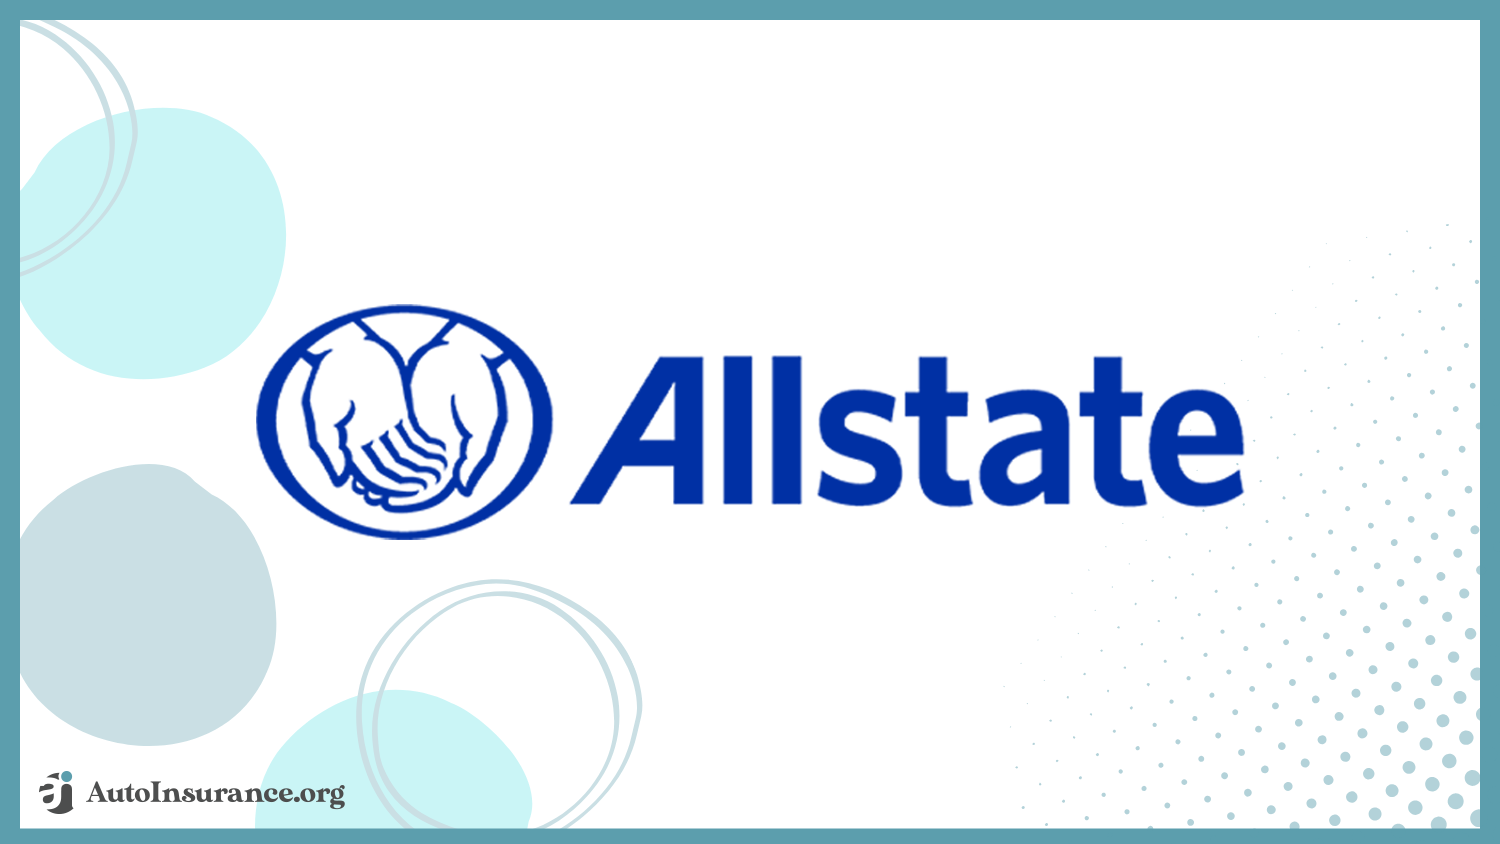 Allstate: Best Auto Insurance for State Employees